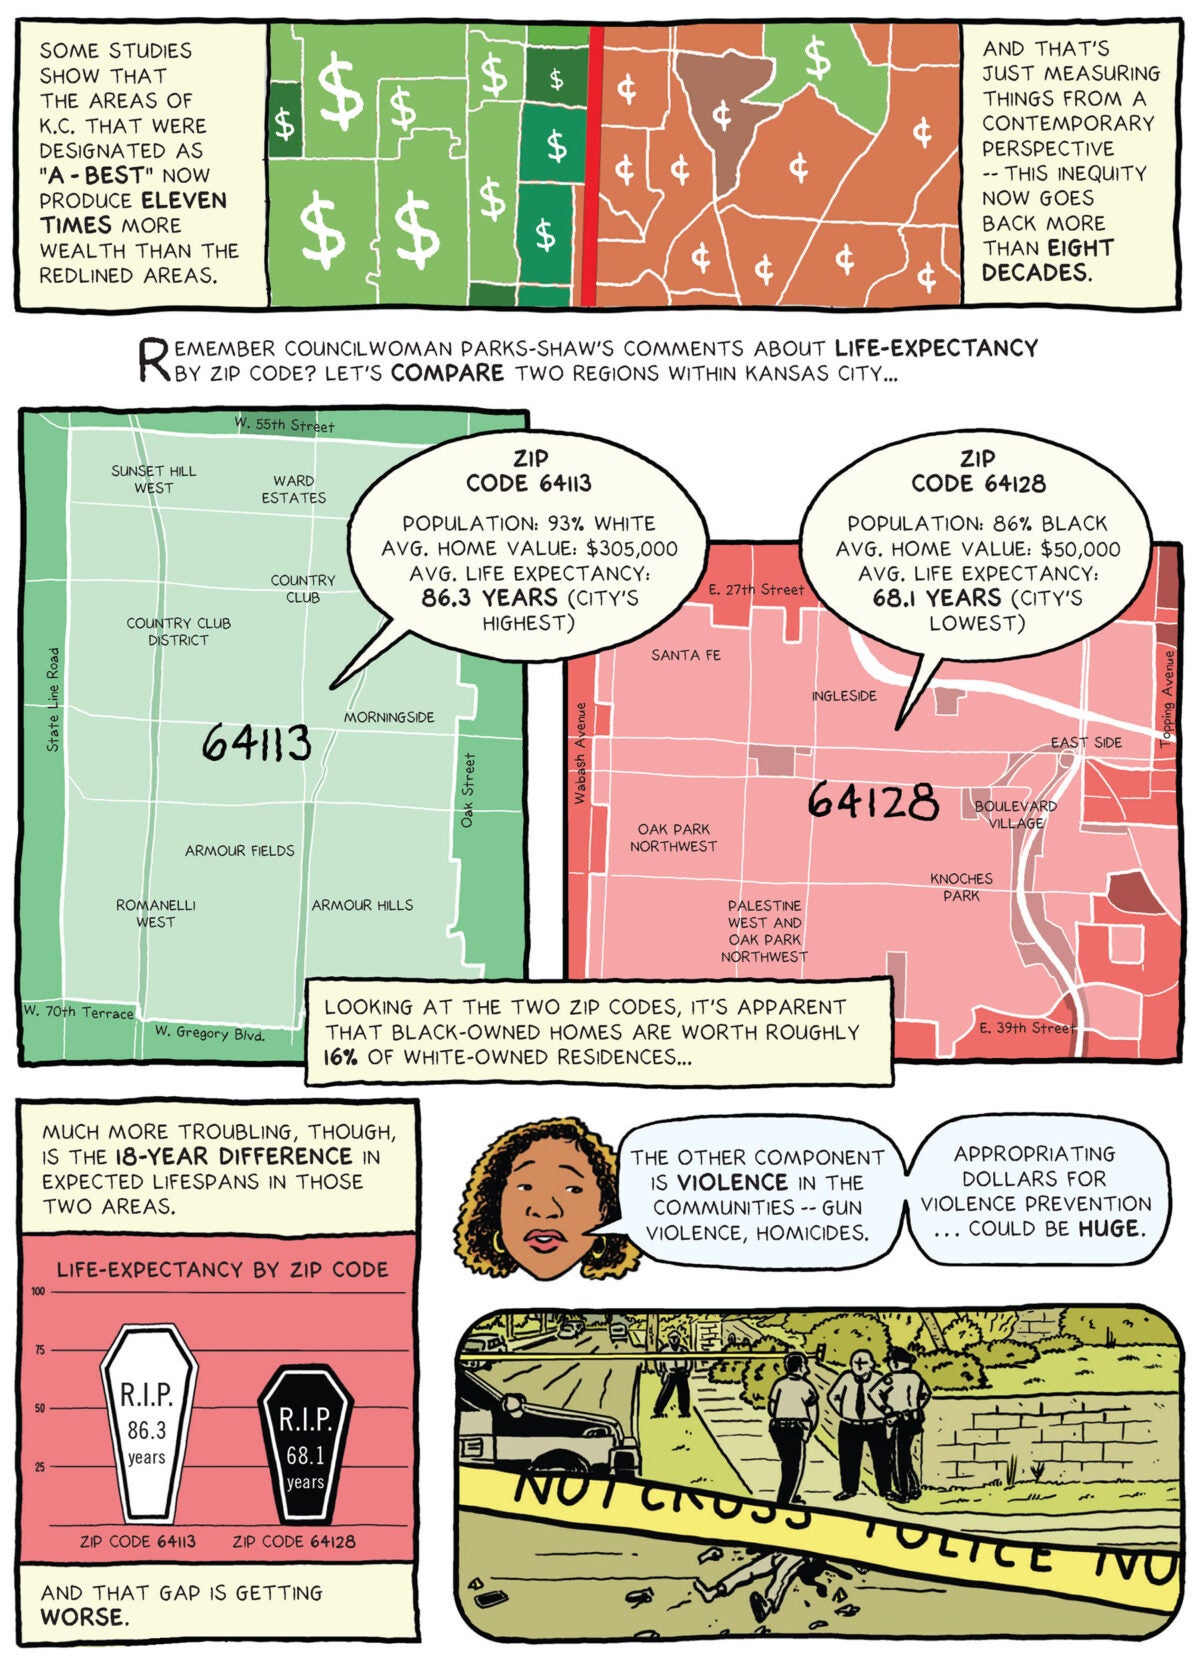 Image six: Top panel: Another illustrated map of Kansas City shows Troost Avenue marked red in the center. The left section of the map is shades of green and marked with dollar symbols of various sizes. The right section is shades of oranges and brown with cents symbols of various sizes and one green section with a dollar sign. Text box reads: “Some studies show that the areas of Kansas City designated as “A: Best” now produce 11 times more wealth than the redlined areas. And that’s just measuring things from a contemporary perspective -- this inequity now goes back more than eight decades”…. Middle panel: Text box reads: Remember Councilwoman Parks-Shaw’s comments about life expectancy by zip code? Let’s compare two regions within Kansas City… Illustrated maps of two zip codes, side by side: Left zip code map, colored green, is labeled “Zip code 64113: Population: 93 percent white, Avg. home value $305,000, Avg. life expectancy: 86.3 years (city’s highest)” Right zip code map, colored red, is labeled “Zip code 64128, Population: 86 percent Black, Avg. home value: $50,000, Avg. life expectancy: 68.1 years (lowest in the city)” Text box reads: “Looking at the two zip codes, it’s apparent that homes in the Black neighborhood are worth roughly 16 percent of those in the white neighborhood…” Bottom left panel: Text box reads: “Much more troubling is the 18-year difference in expected lifespans. And that gap is getting worse. Illustrated pink chart shows two cofins comparing life expectancy by zip code. The White tombstone, on left, for zip code 64113, reads “R.I.P. 86.3 years.” The Black tombstone, on right, for zip code 64128, reads R.I.P. 68.1 years.” Bottom right panel: Illustration of Ryana Parks-Shaw saying “The other component is violence in the communities — gun violence, homicides. Appropriating dollars for violence prevention ... could be huge. Illustration of a Kansas City street corner with a splotch of dried blood on the road. Tattered police tape blows in the breeze.